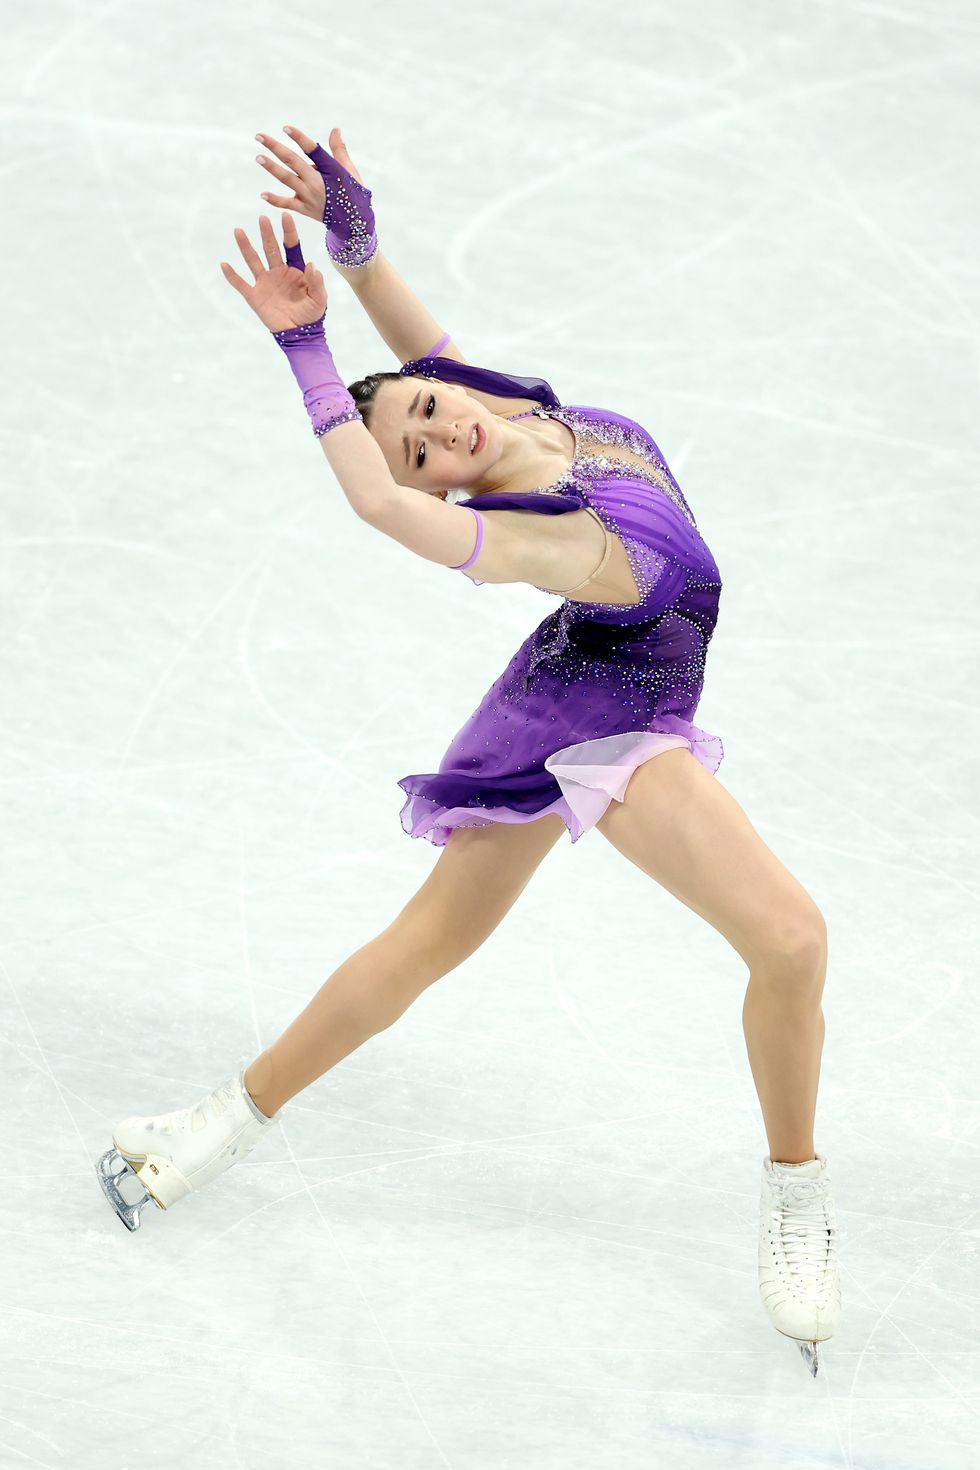 kamila valieva competing at the 2022 beijing winter olympics in a purple dress